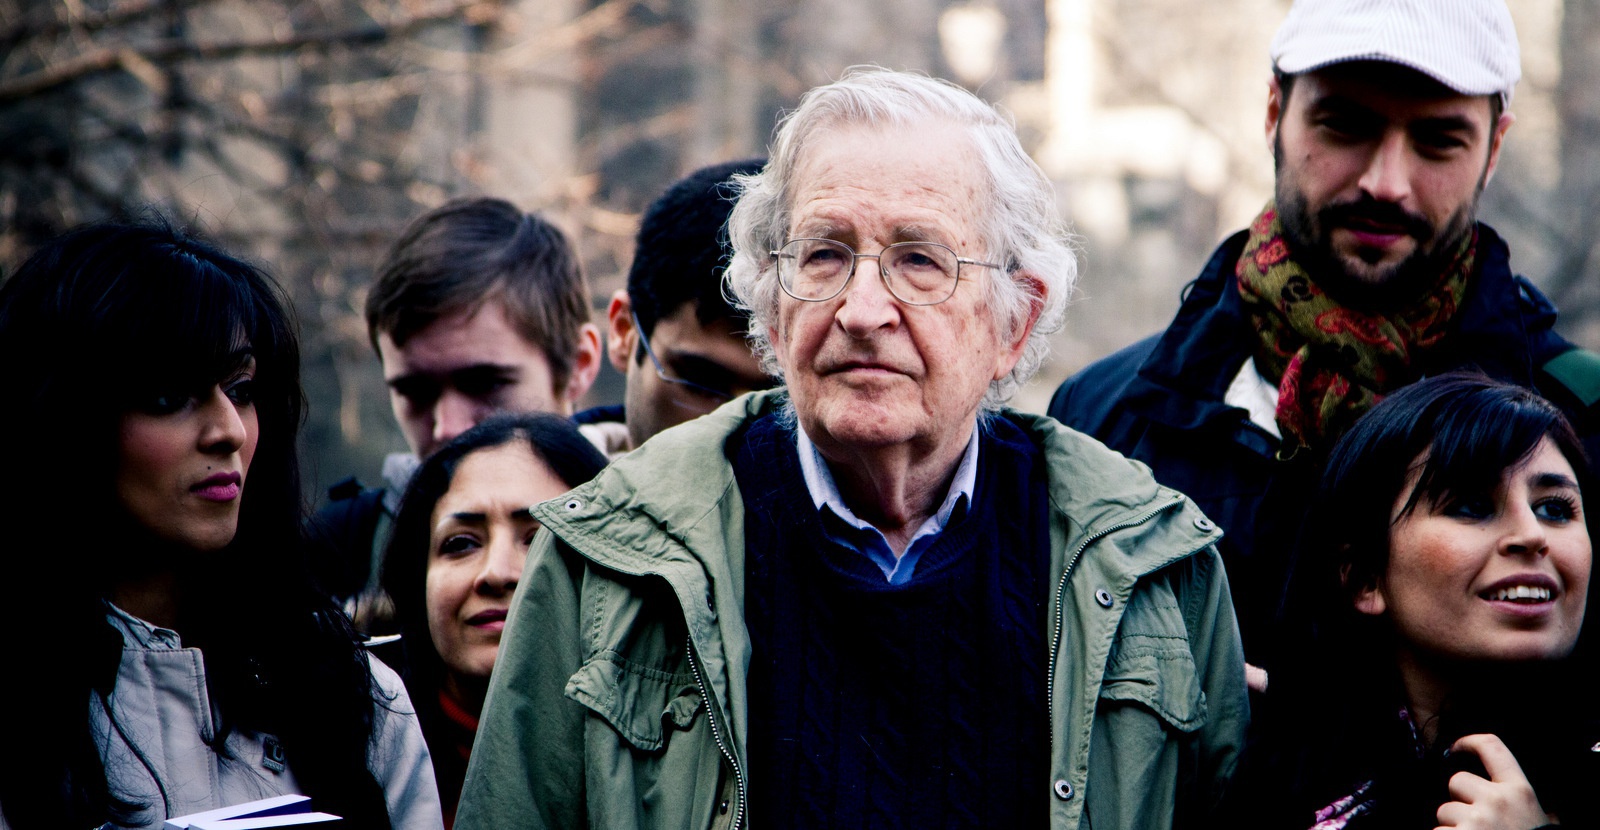 Noam Chomsky: Rojava survival is a miracle, Biden does not approve of killing Kurds